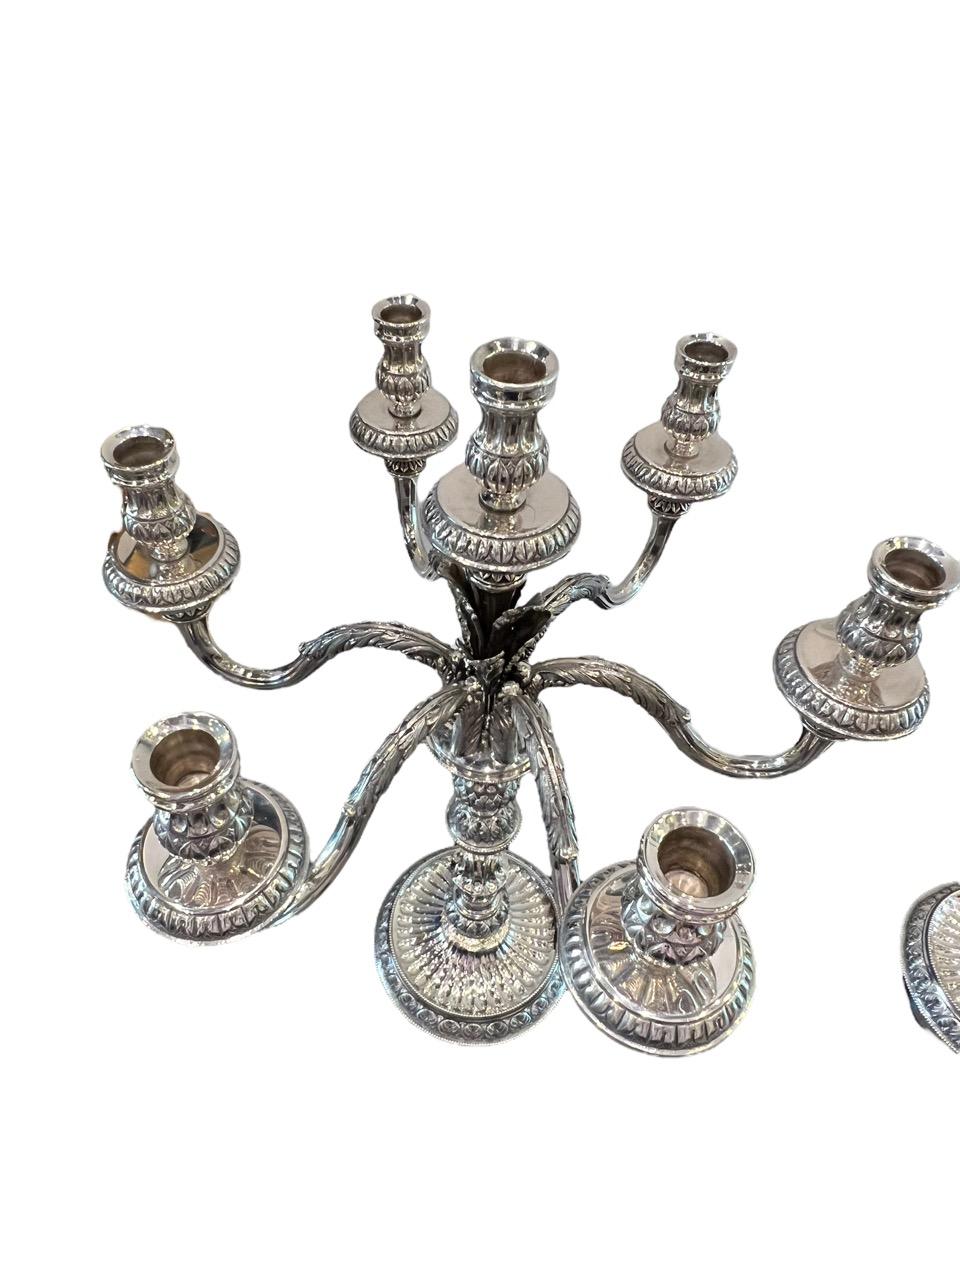 1910 Italian Pair of Sterling Silver Candelabras, Tall and Heavy 8